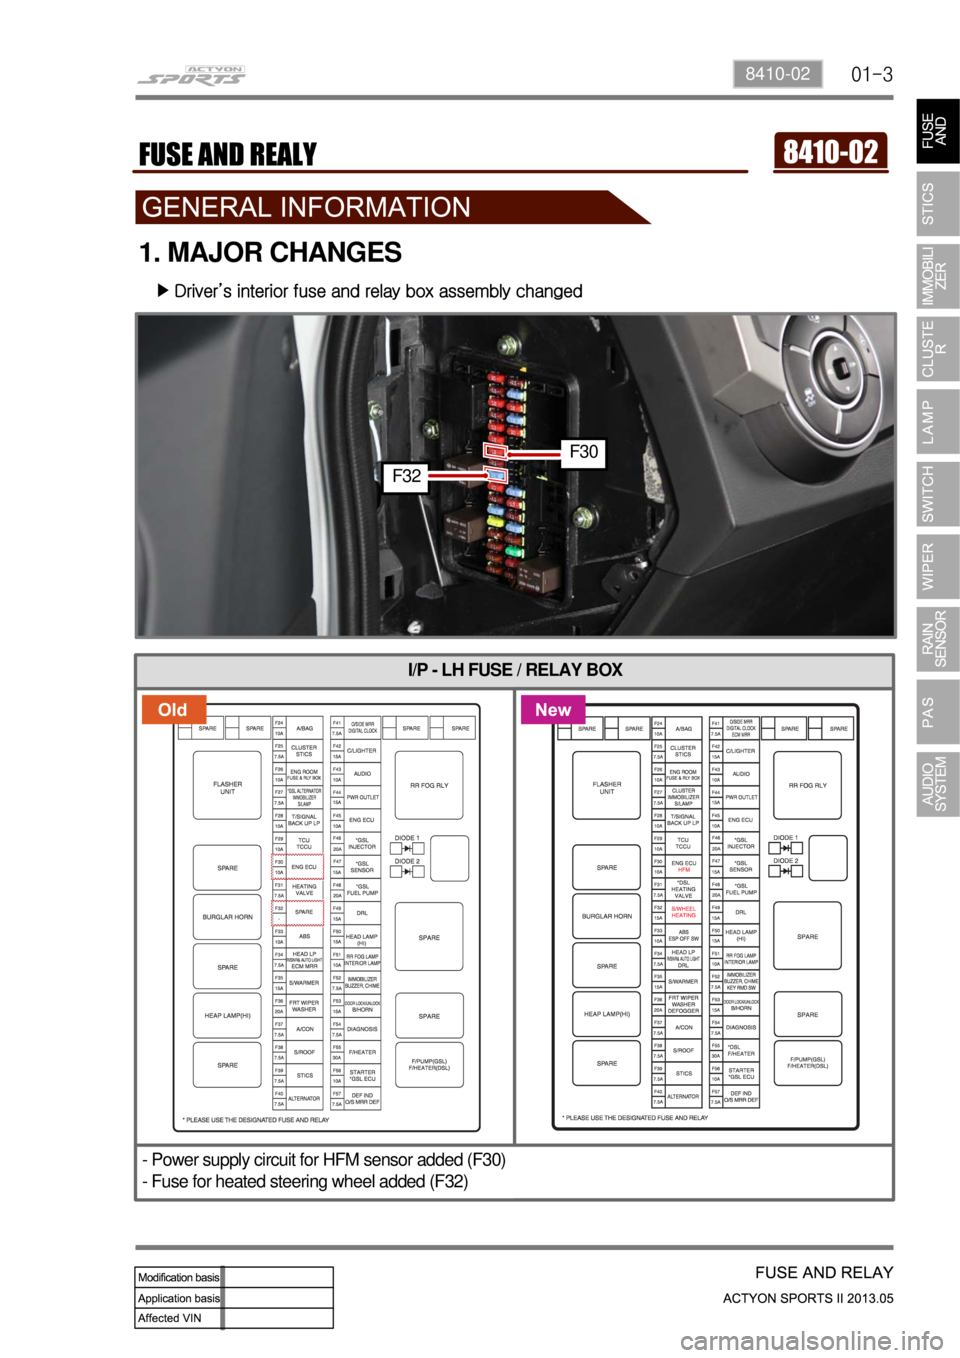 SSANGYONG NEW ACTYON SPORTS 2013  Service Manual 01-38410-02
I/P - LH FUSE / RELAY BOX
- Power supply circuit for HFM sensor added (F30) 
- Fuse for heated steering wheel added (F32)
1. MAJOR CHANGES
Driver’s interior fuse and relay box assembly c